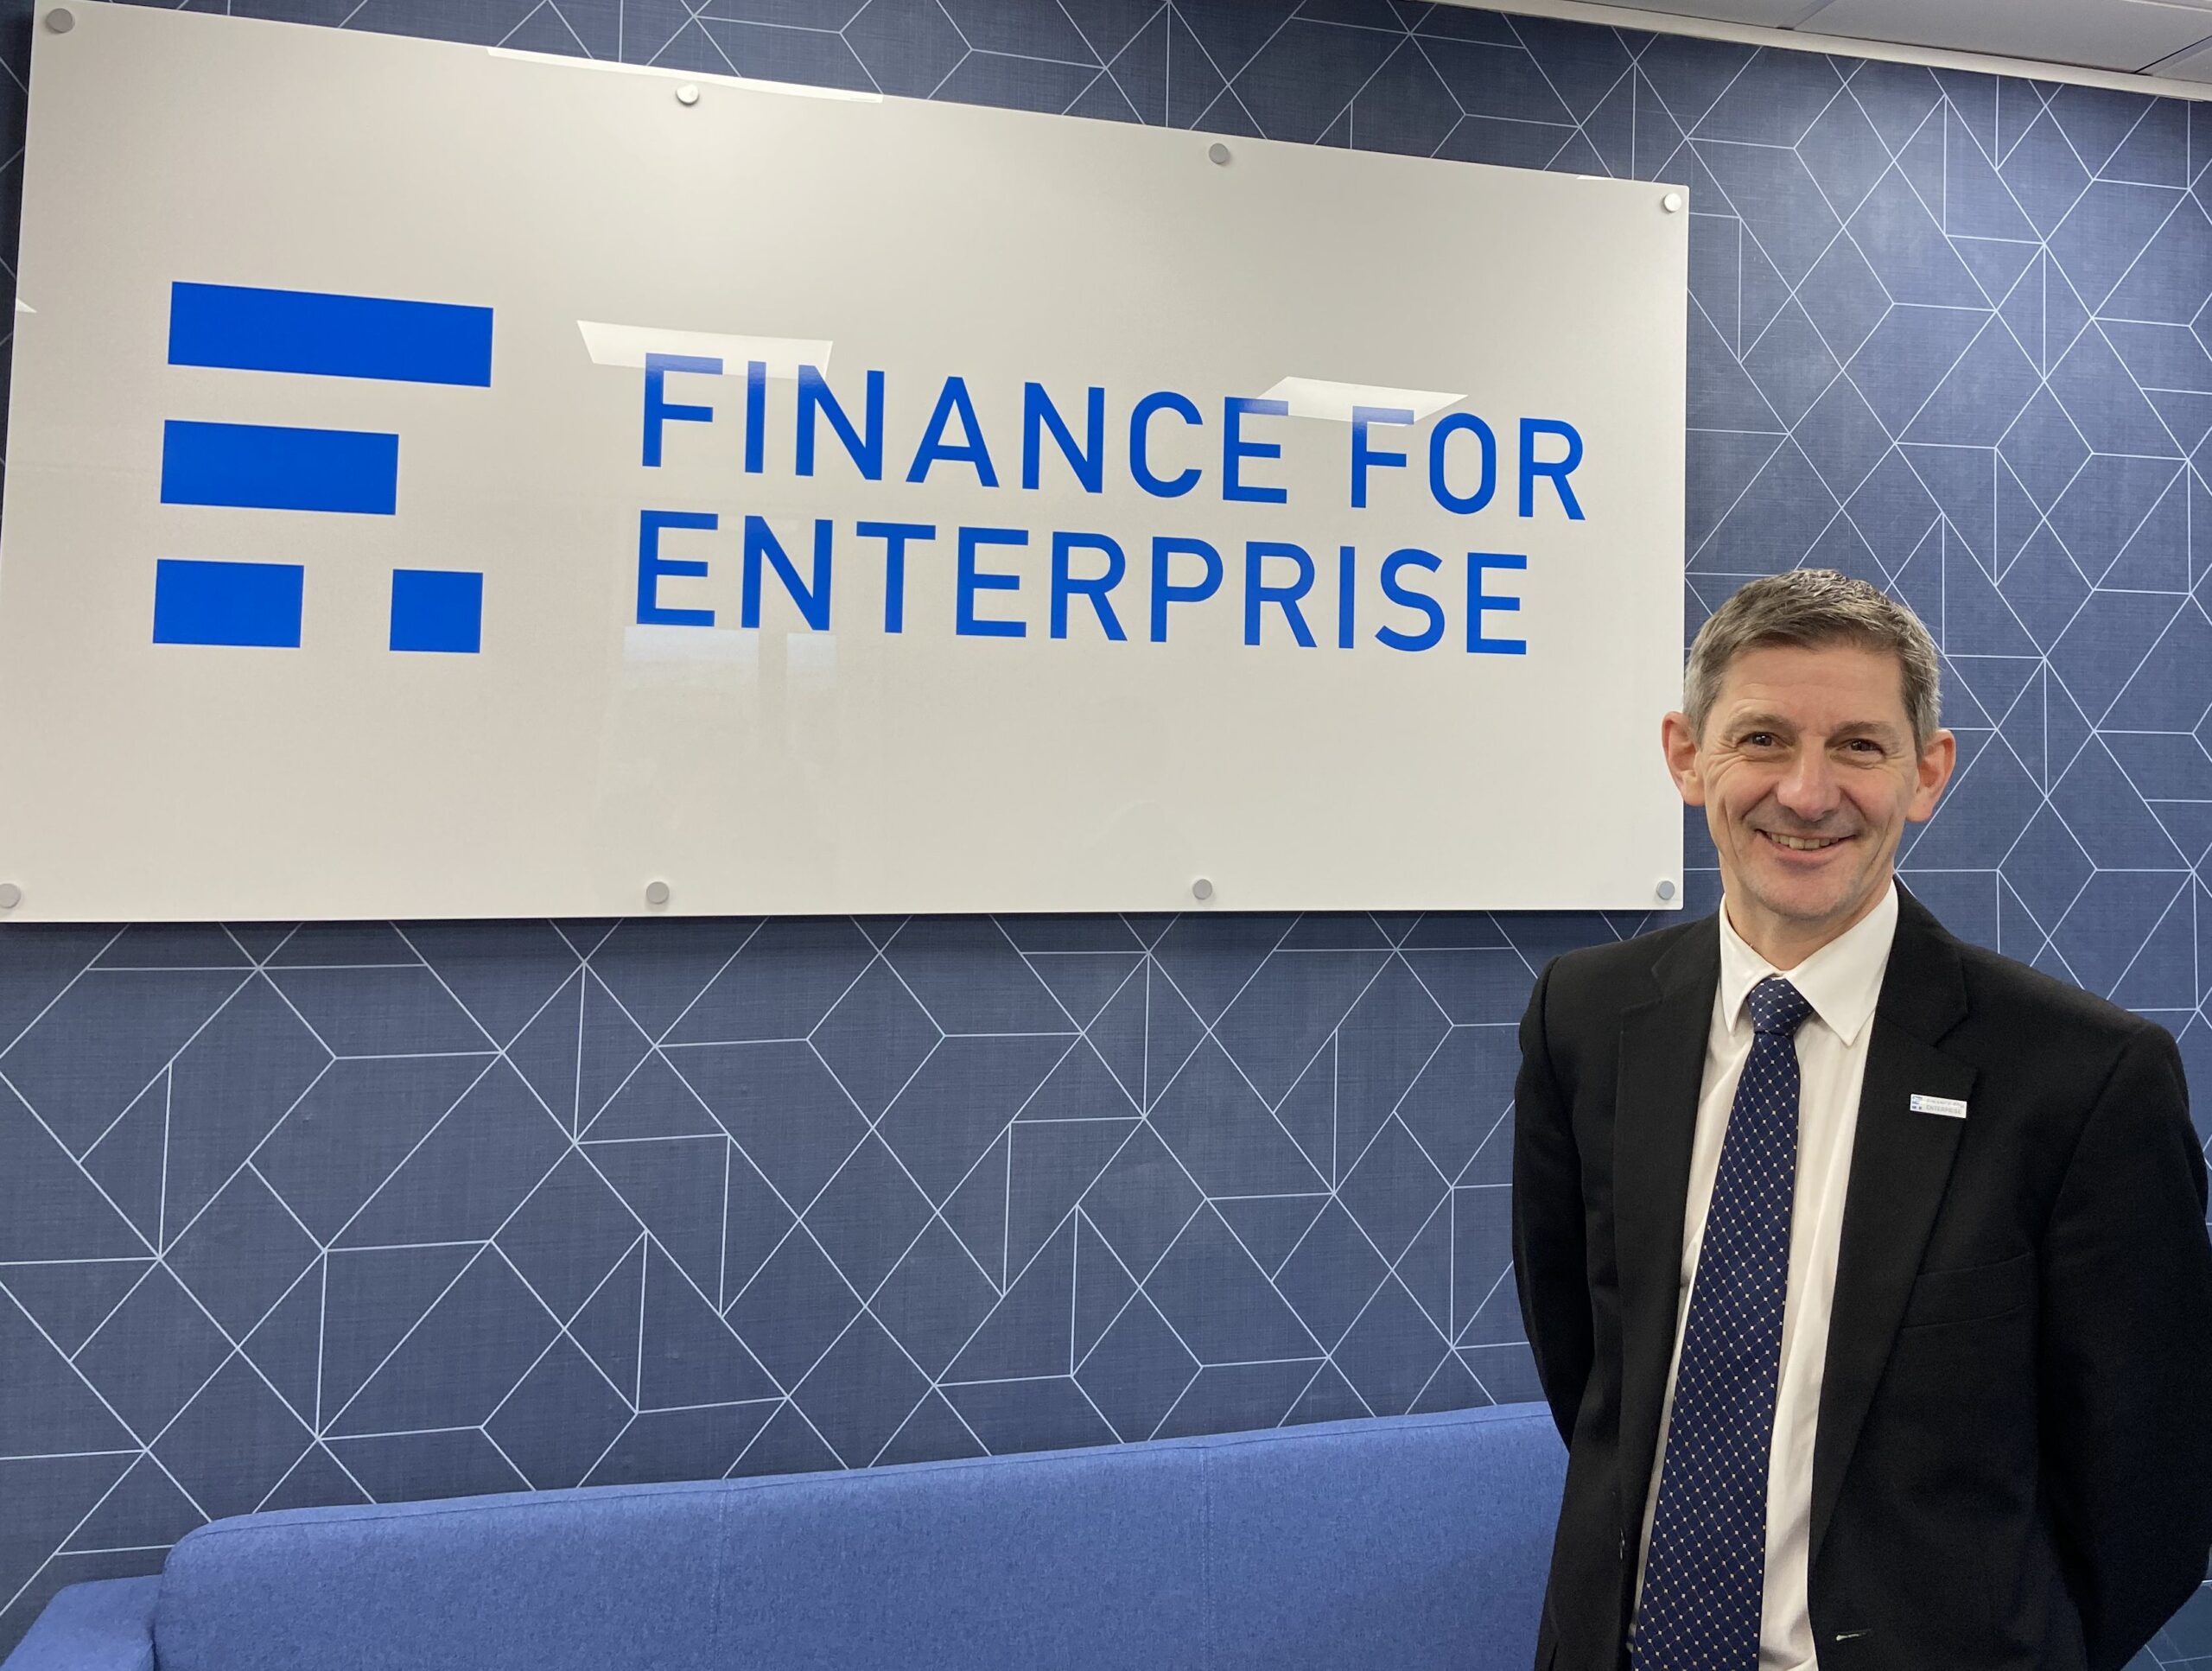 Experienced Investment Manager Jeremy Meadowcroft kicks off Finance For Enterprise career